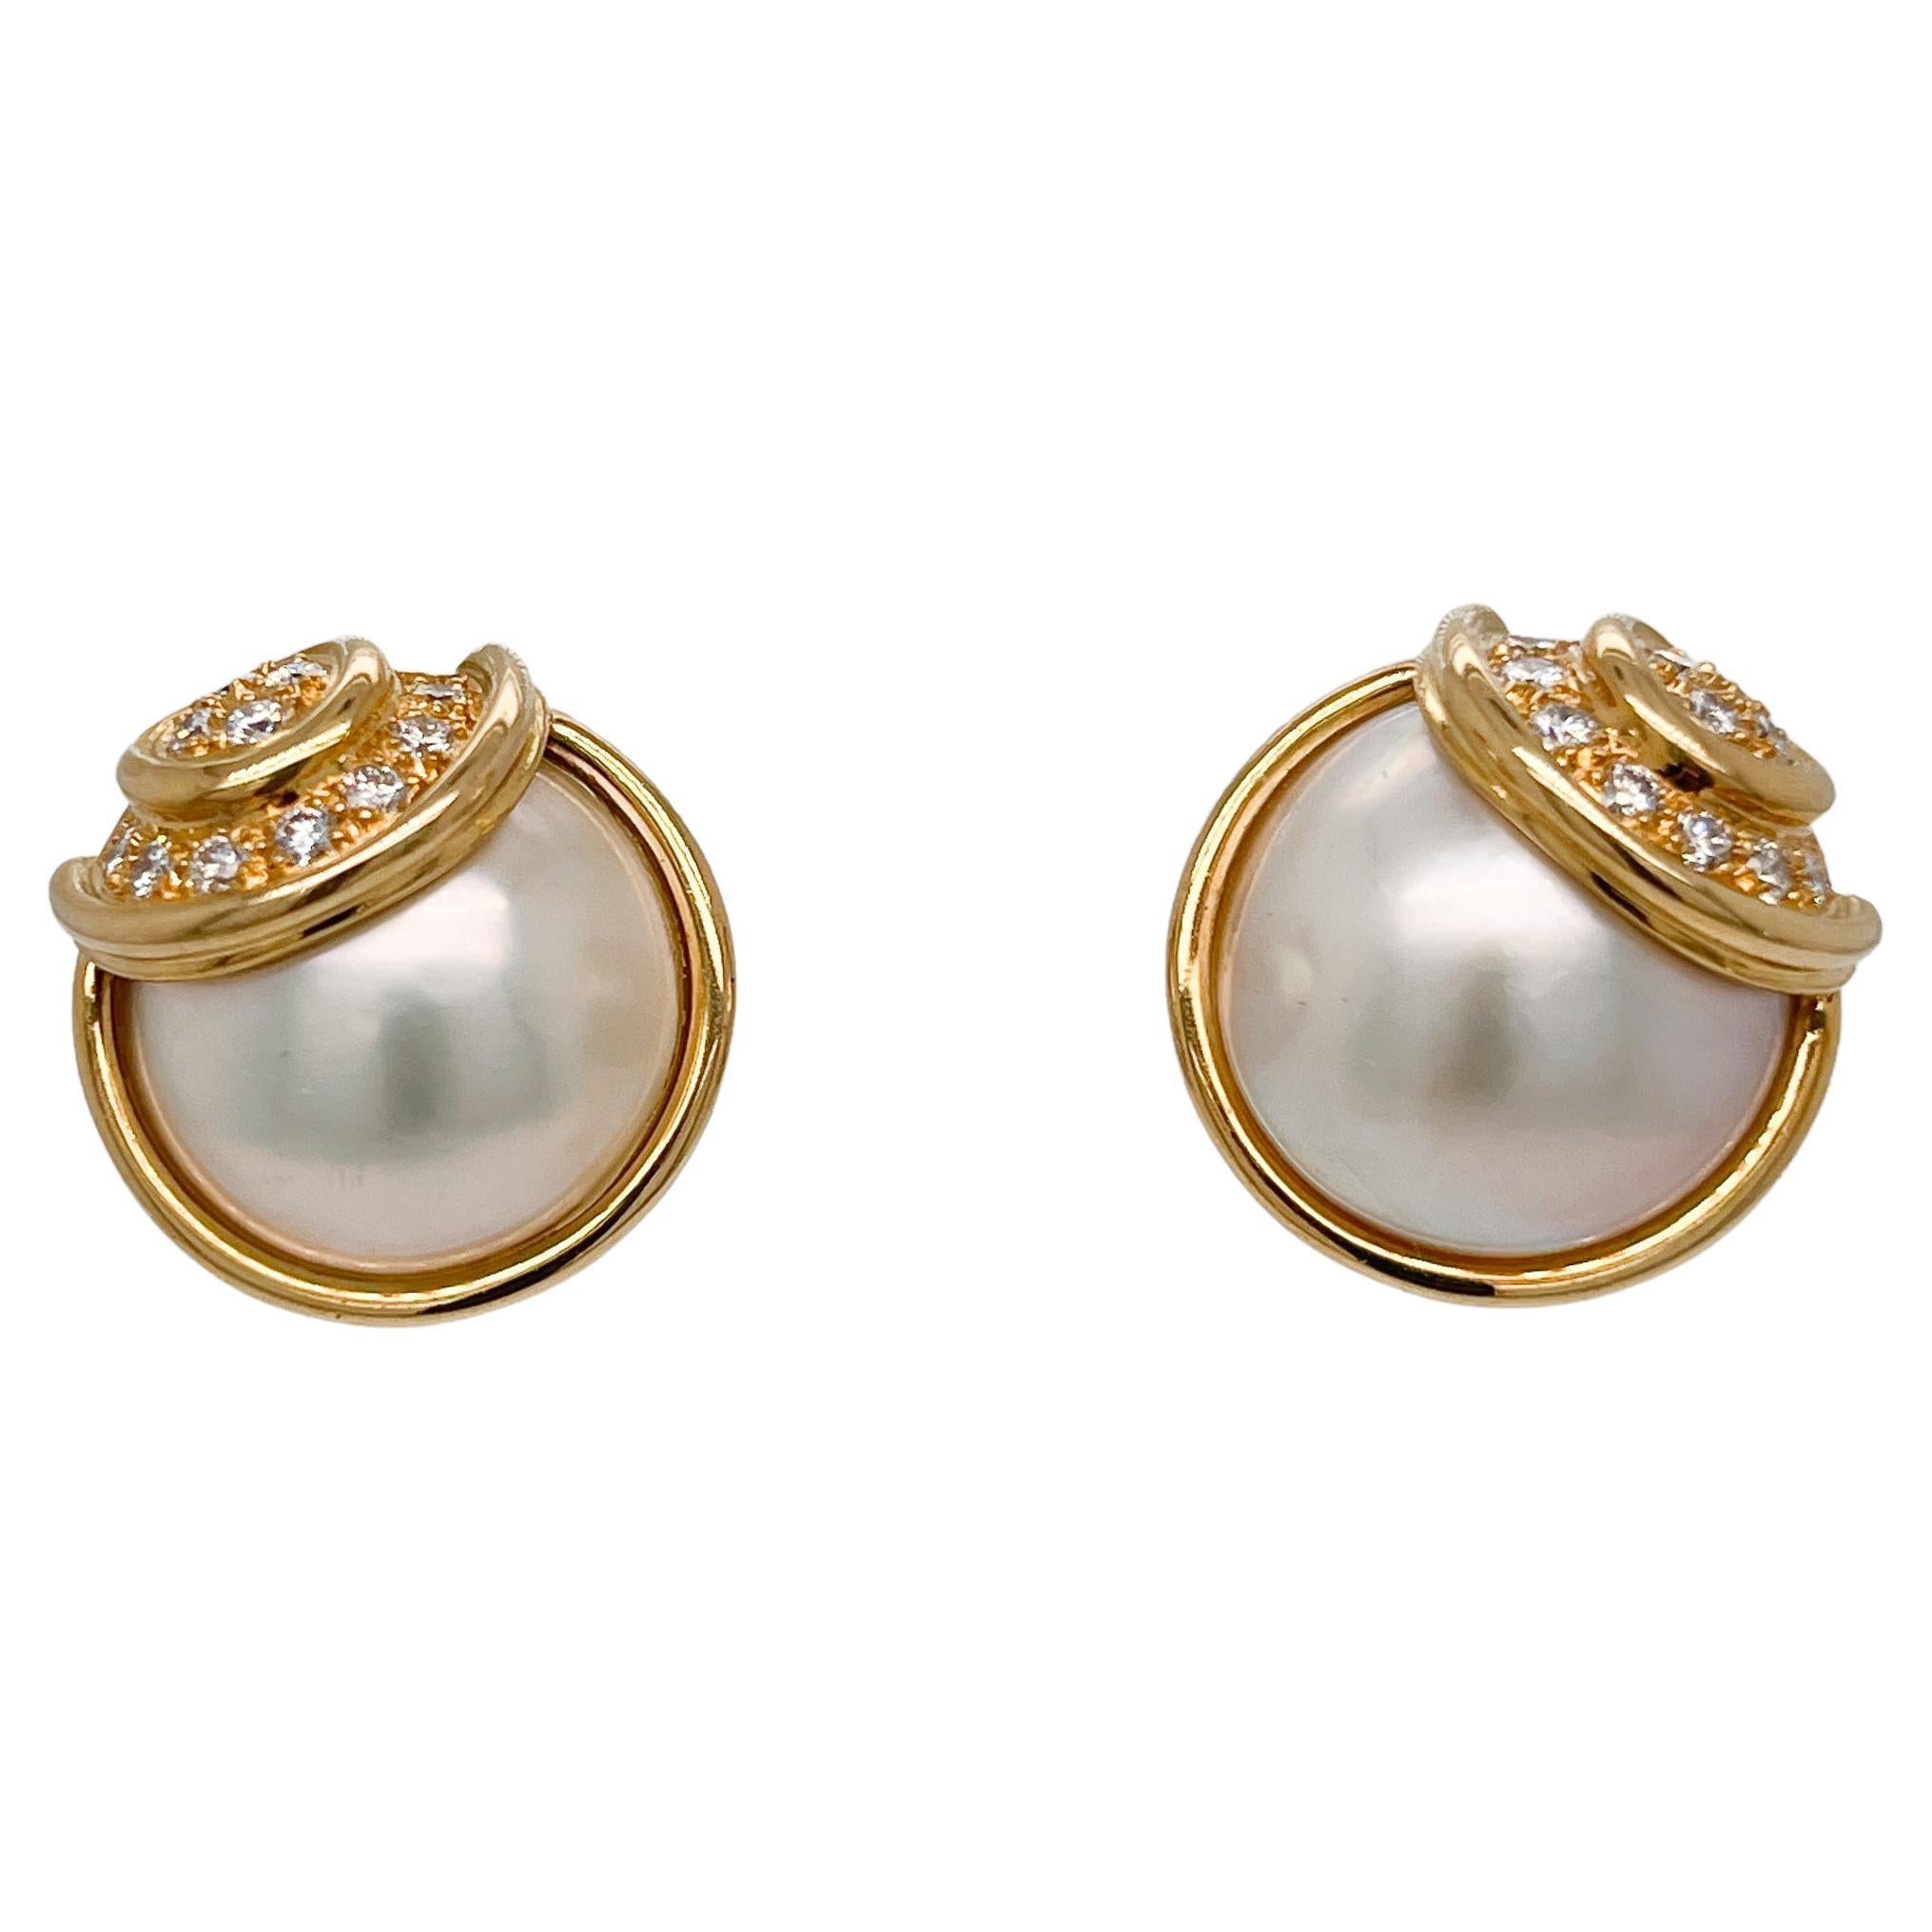 Pair of Signed Gübelin 18K Gold, Diamond & Mabe Pearl Clip-On Earrings